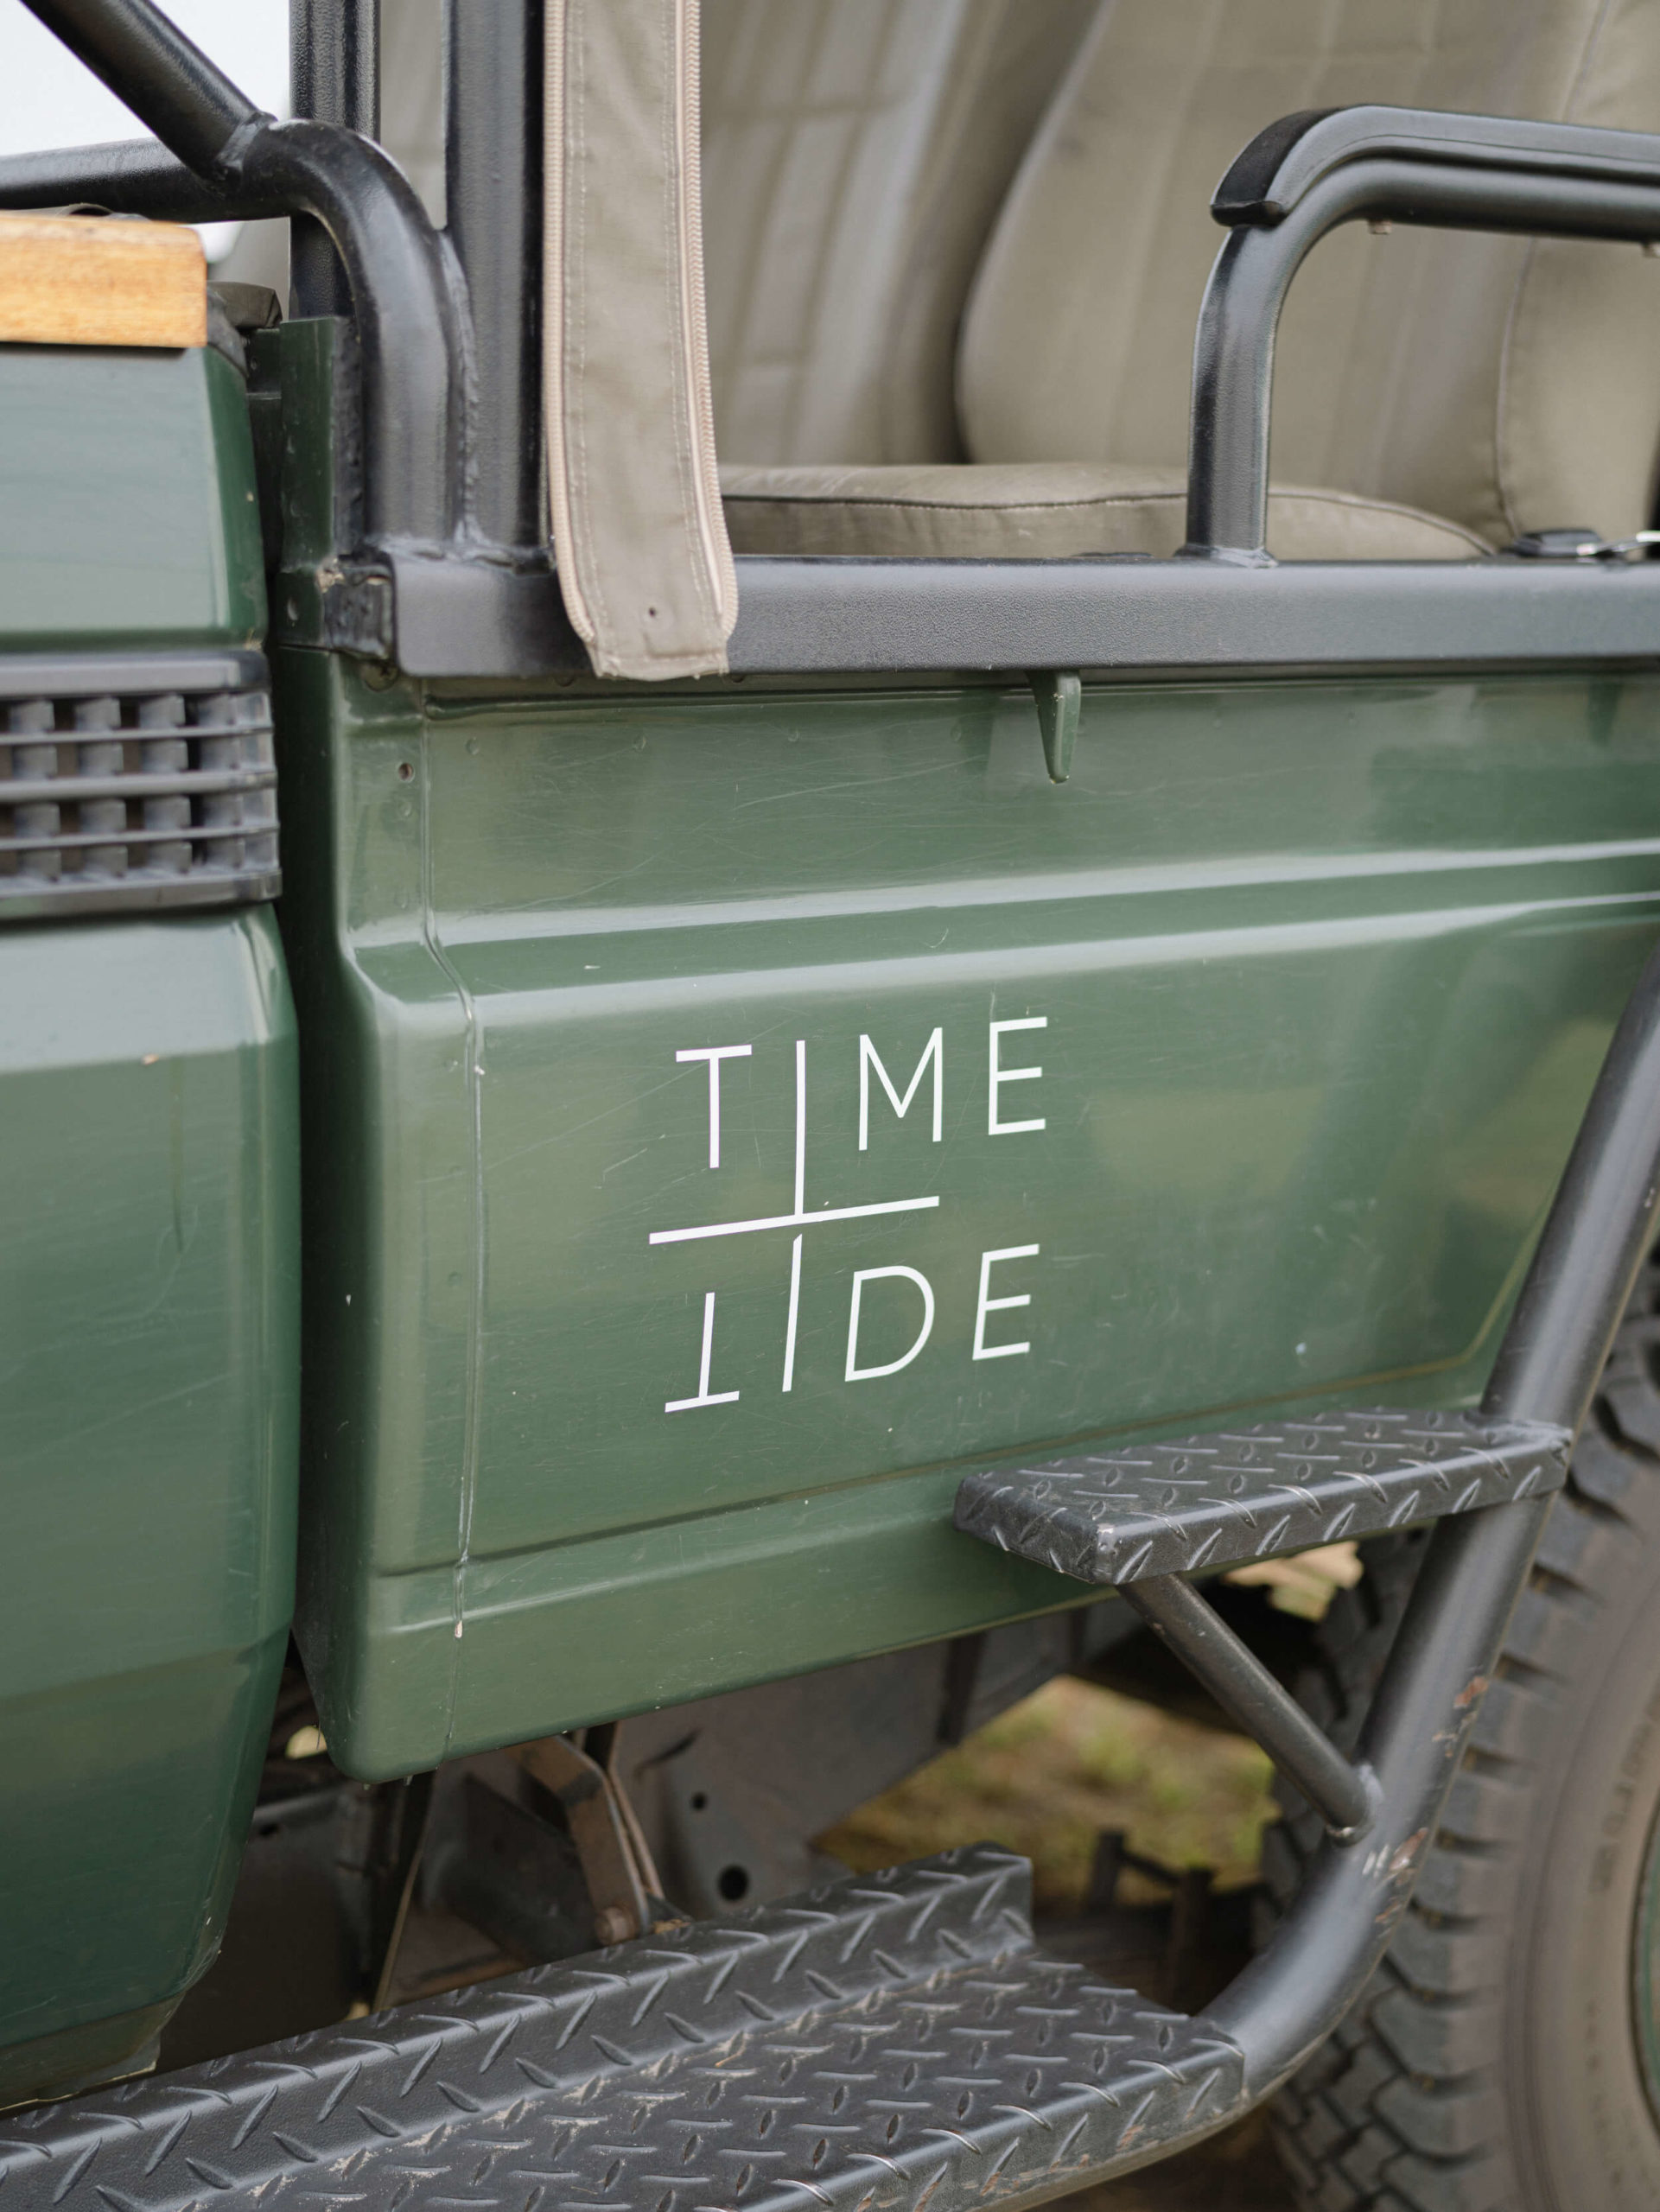 KT Merry's trip to Africa with Time + Tide